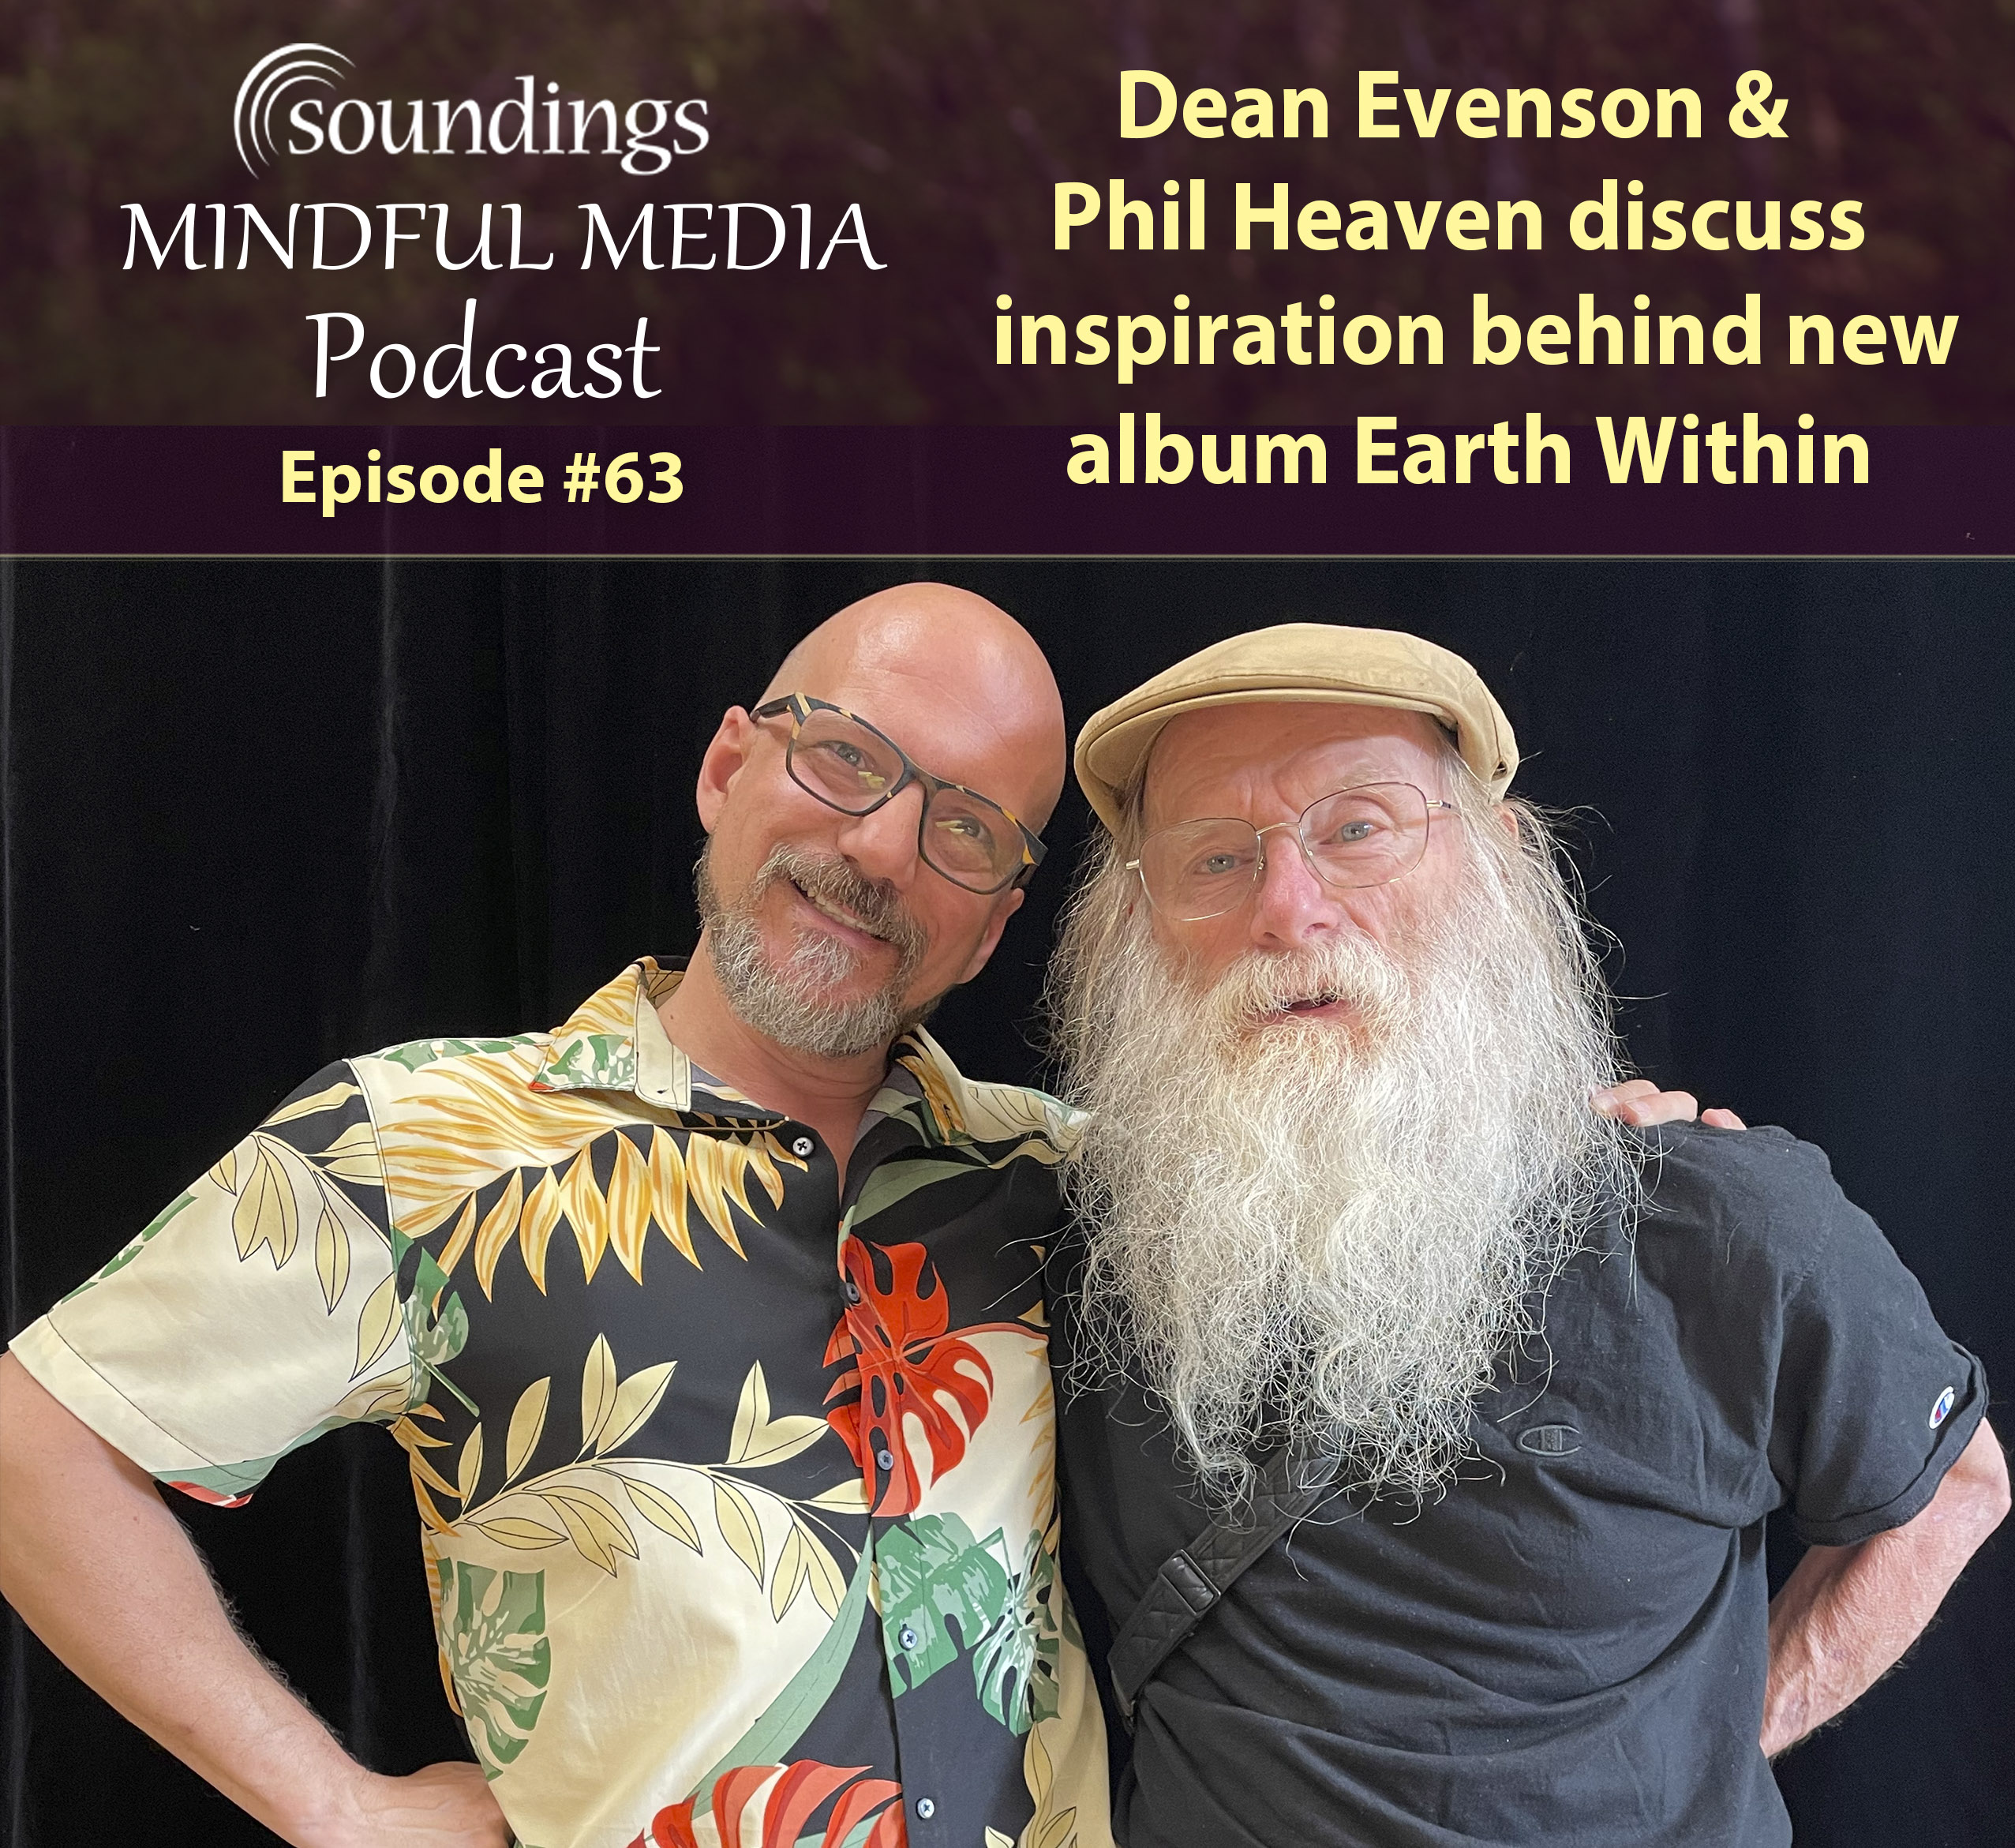 Dean Evenson & Phil Heaven Discuss Inspiration Behind New Album EARTH WITHIN